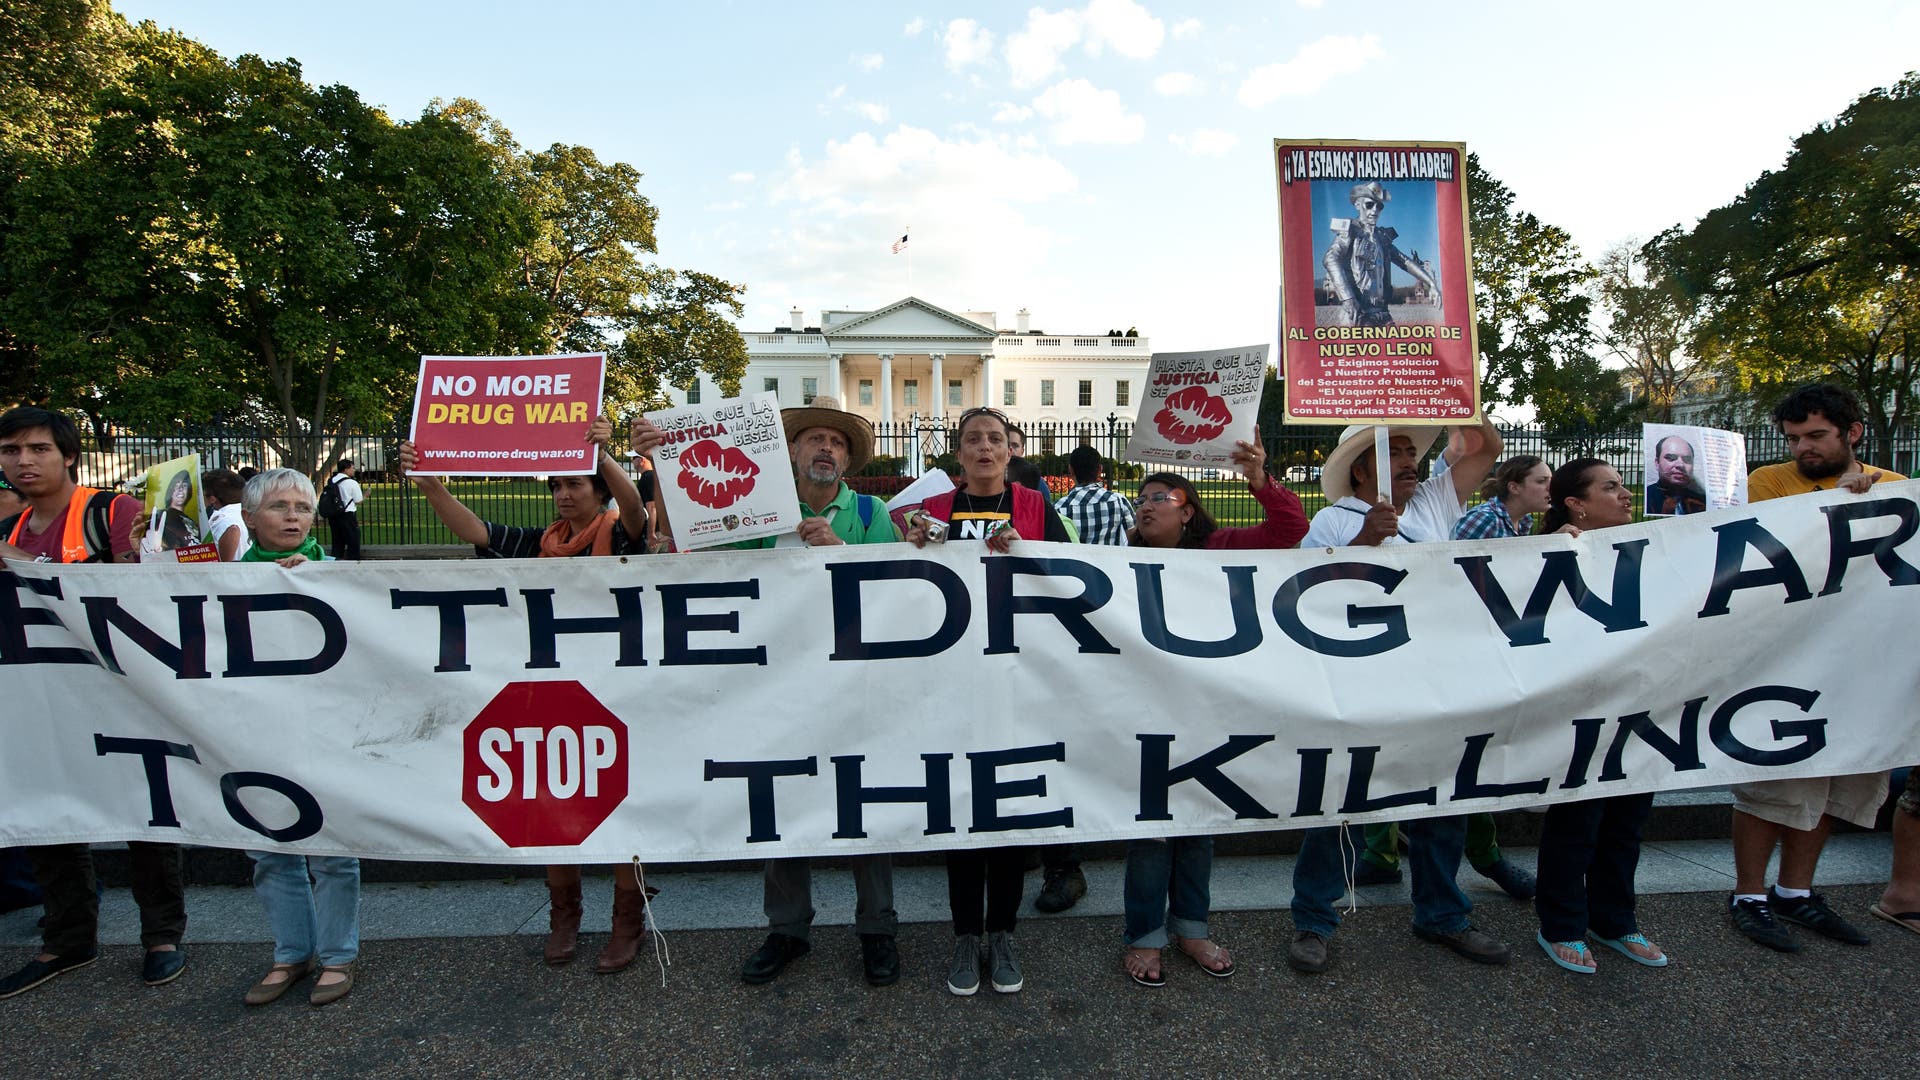 US-MEXICO-CRIME-DRUGS-PROTESSTProtestors hold a sign in front of the White House in Washington on September 10, 2012 during the "Caravan for Peace," across the United States, a month-long campaign to protest the brutal drug war in Mexico and the US. The caravan departed from Tijuana in August with about 250 participants and ended in Washington. AFP PHOTO/Nicholas KAMM (Photo credit should read NICHOLAS KAMM/AFP/GettyImages)